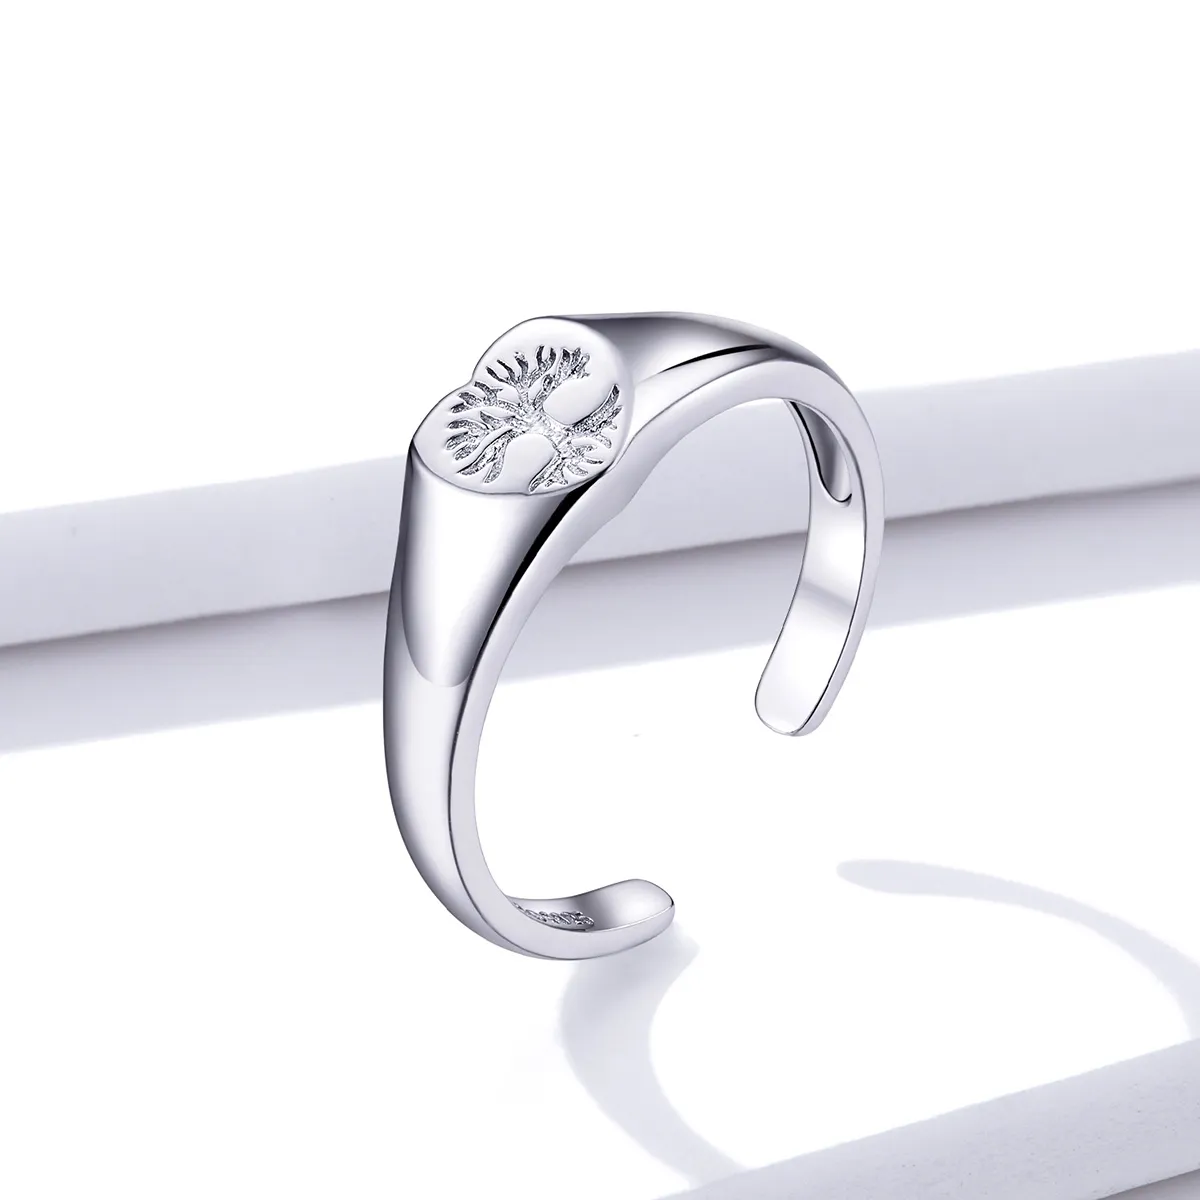 Pandora Style Silver Tree of Life Open Ring - BSR122